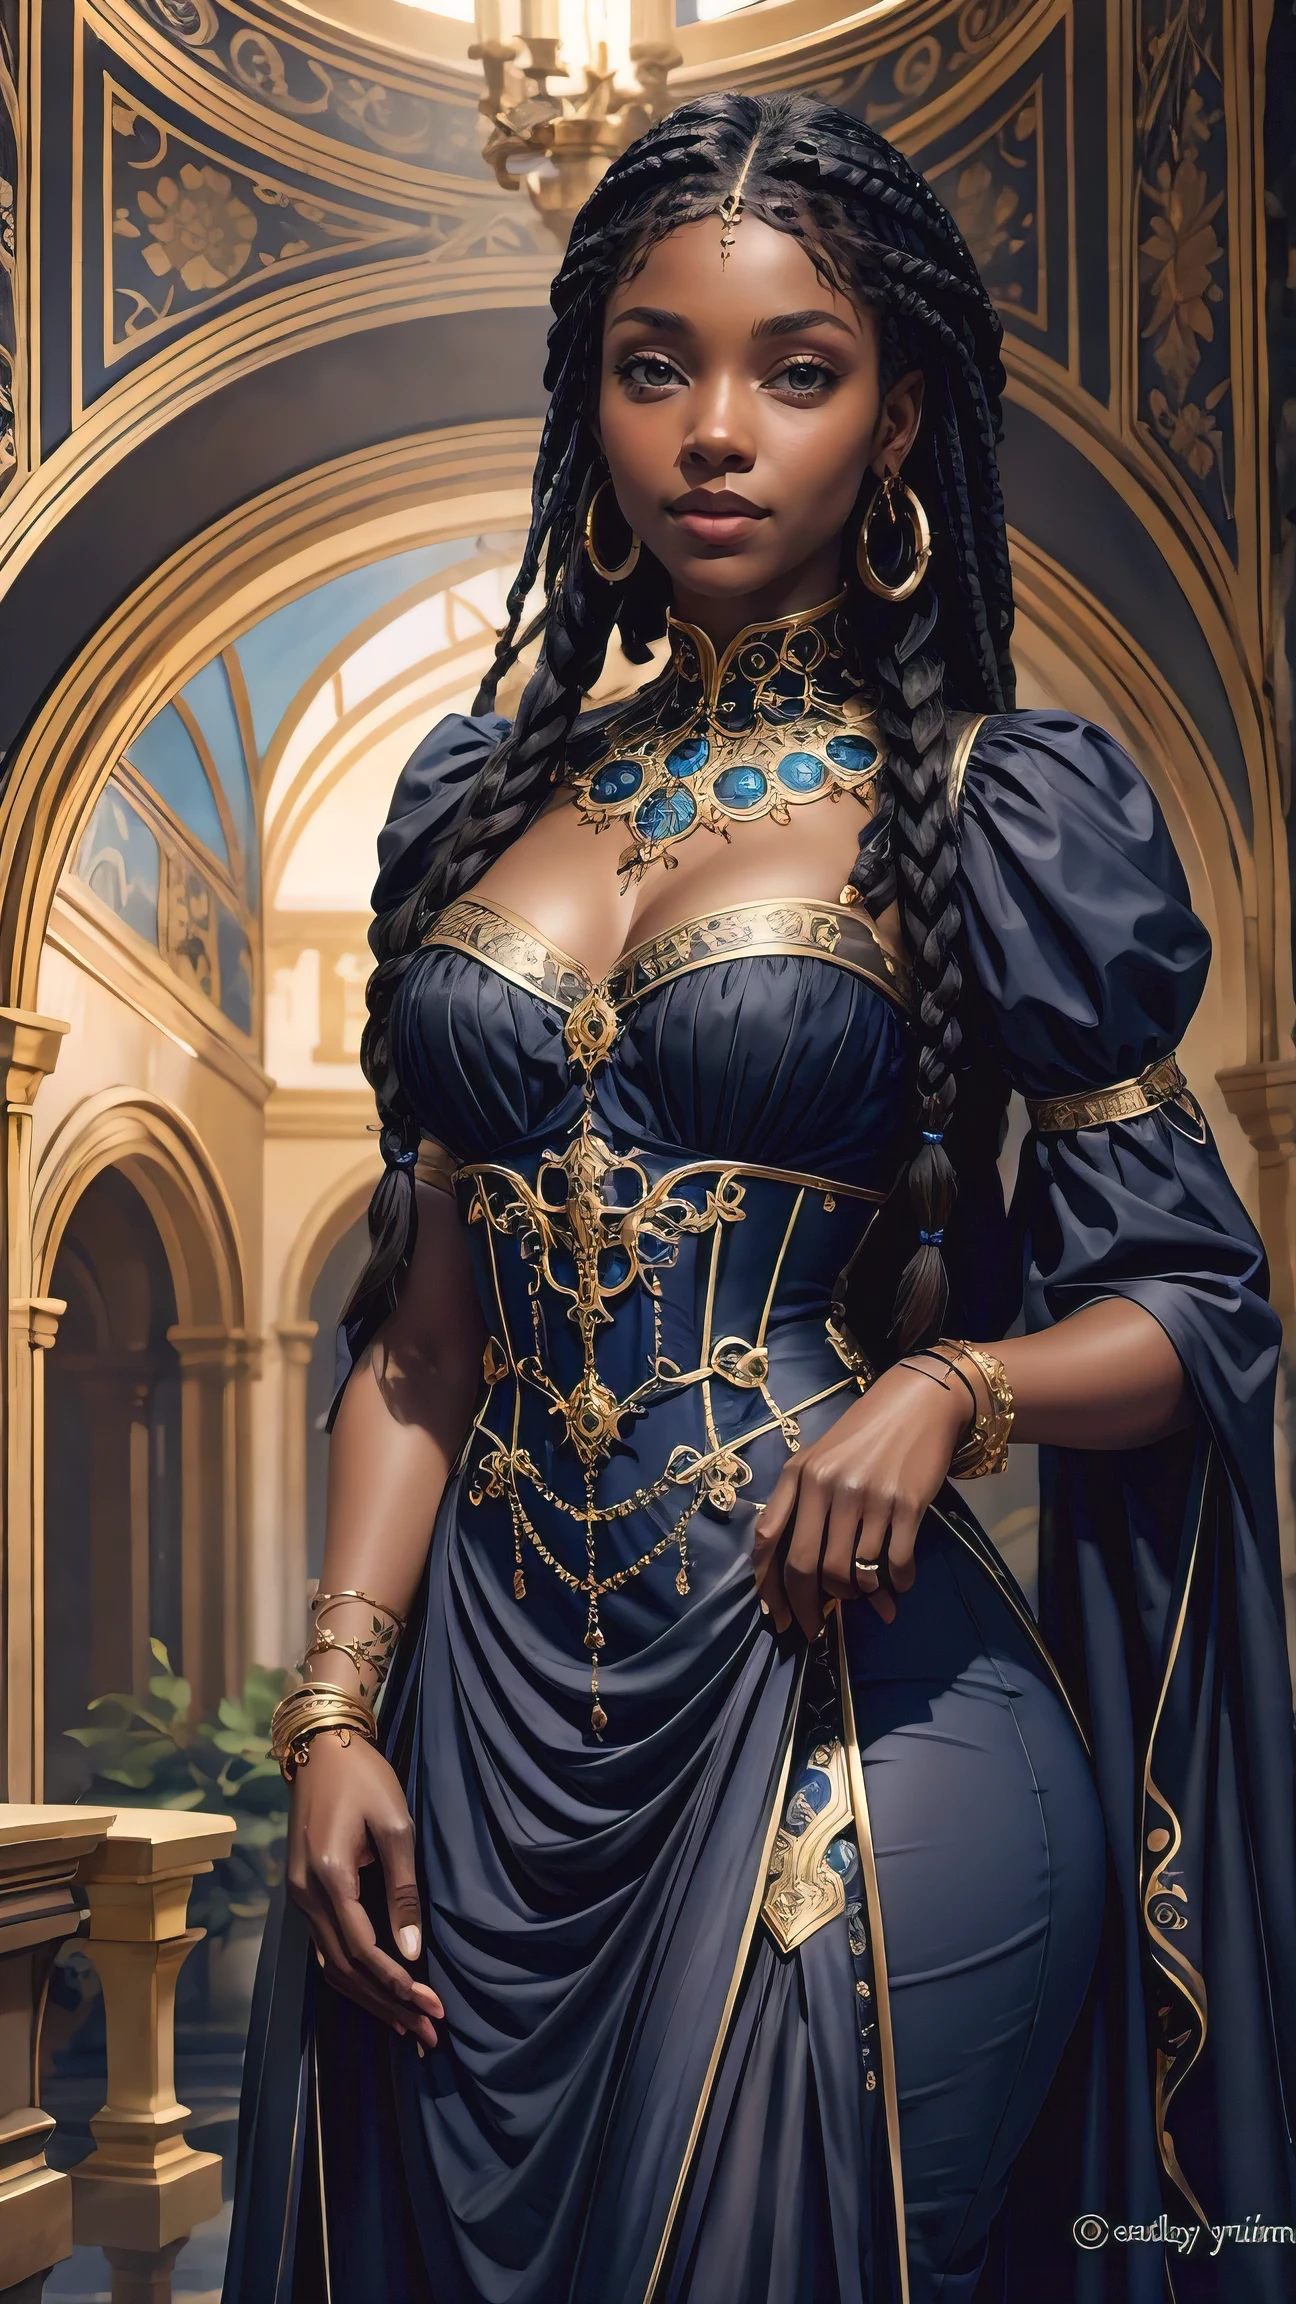 Black model with braids looking beautiful in gold jewelry, blue eyes, in the style of brown and azure, highly realistic, in the style of gothic romance, historical inspiration, meticulous details